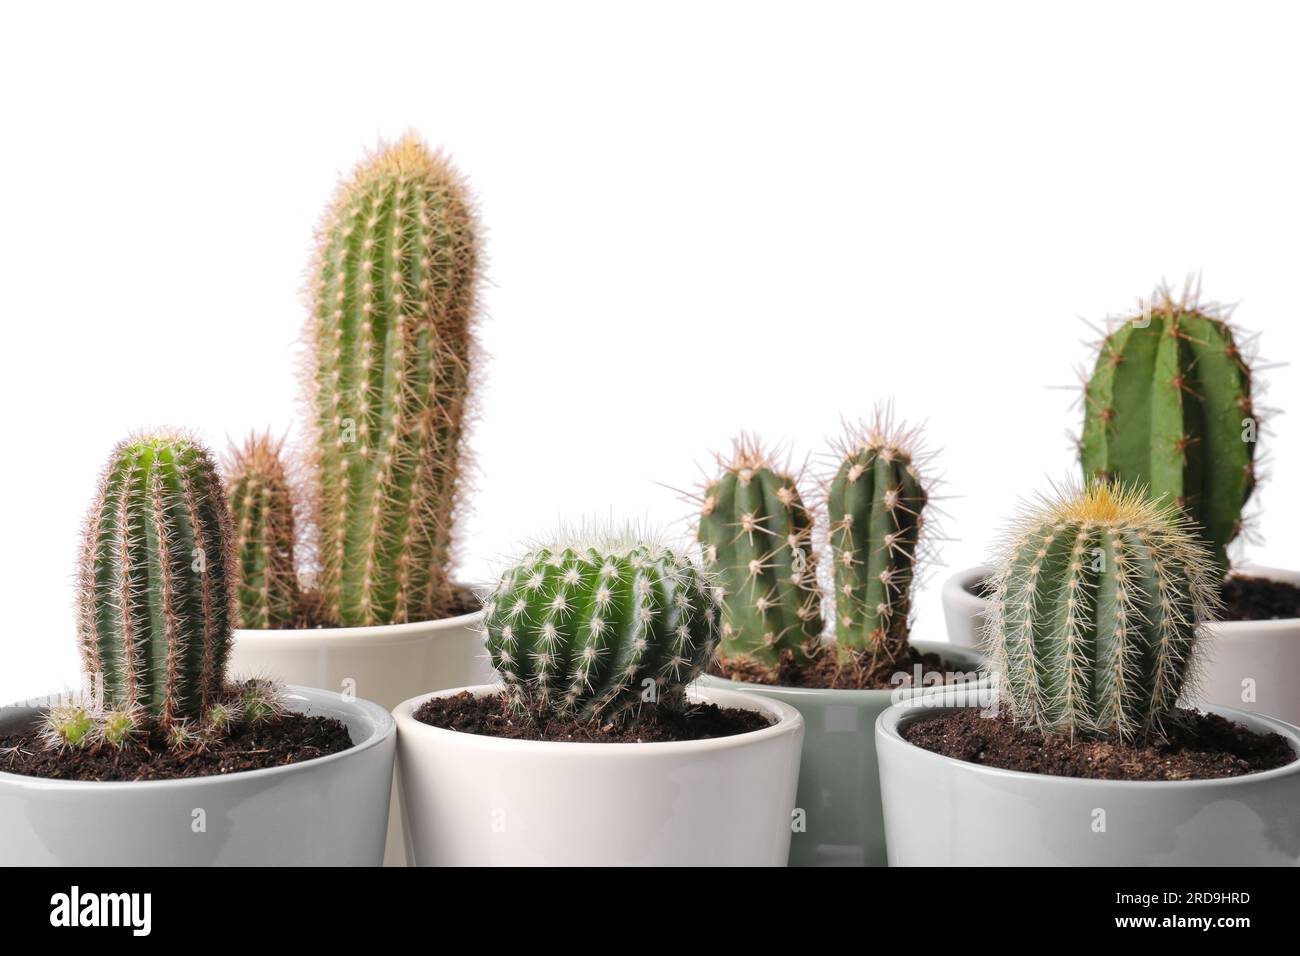 Many different cacti in pots on white background Stock Photo